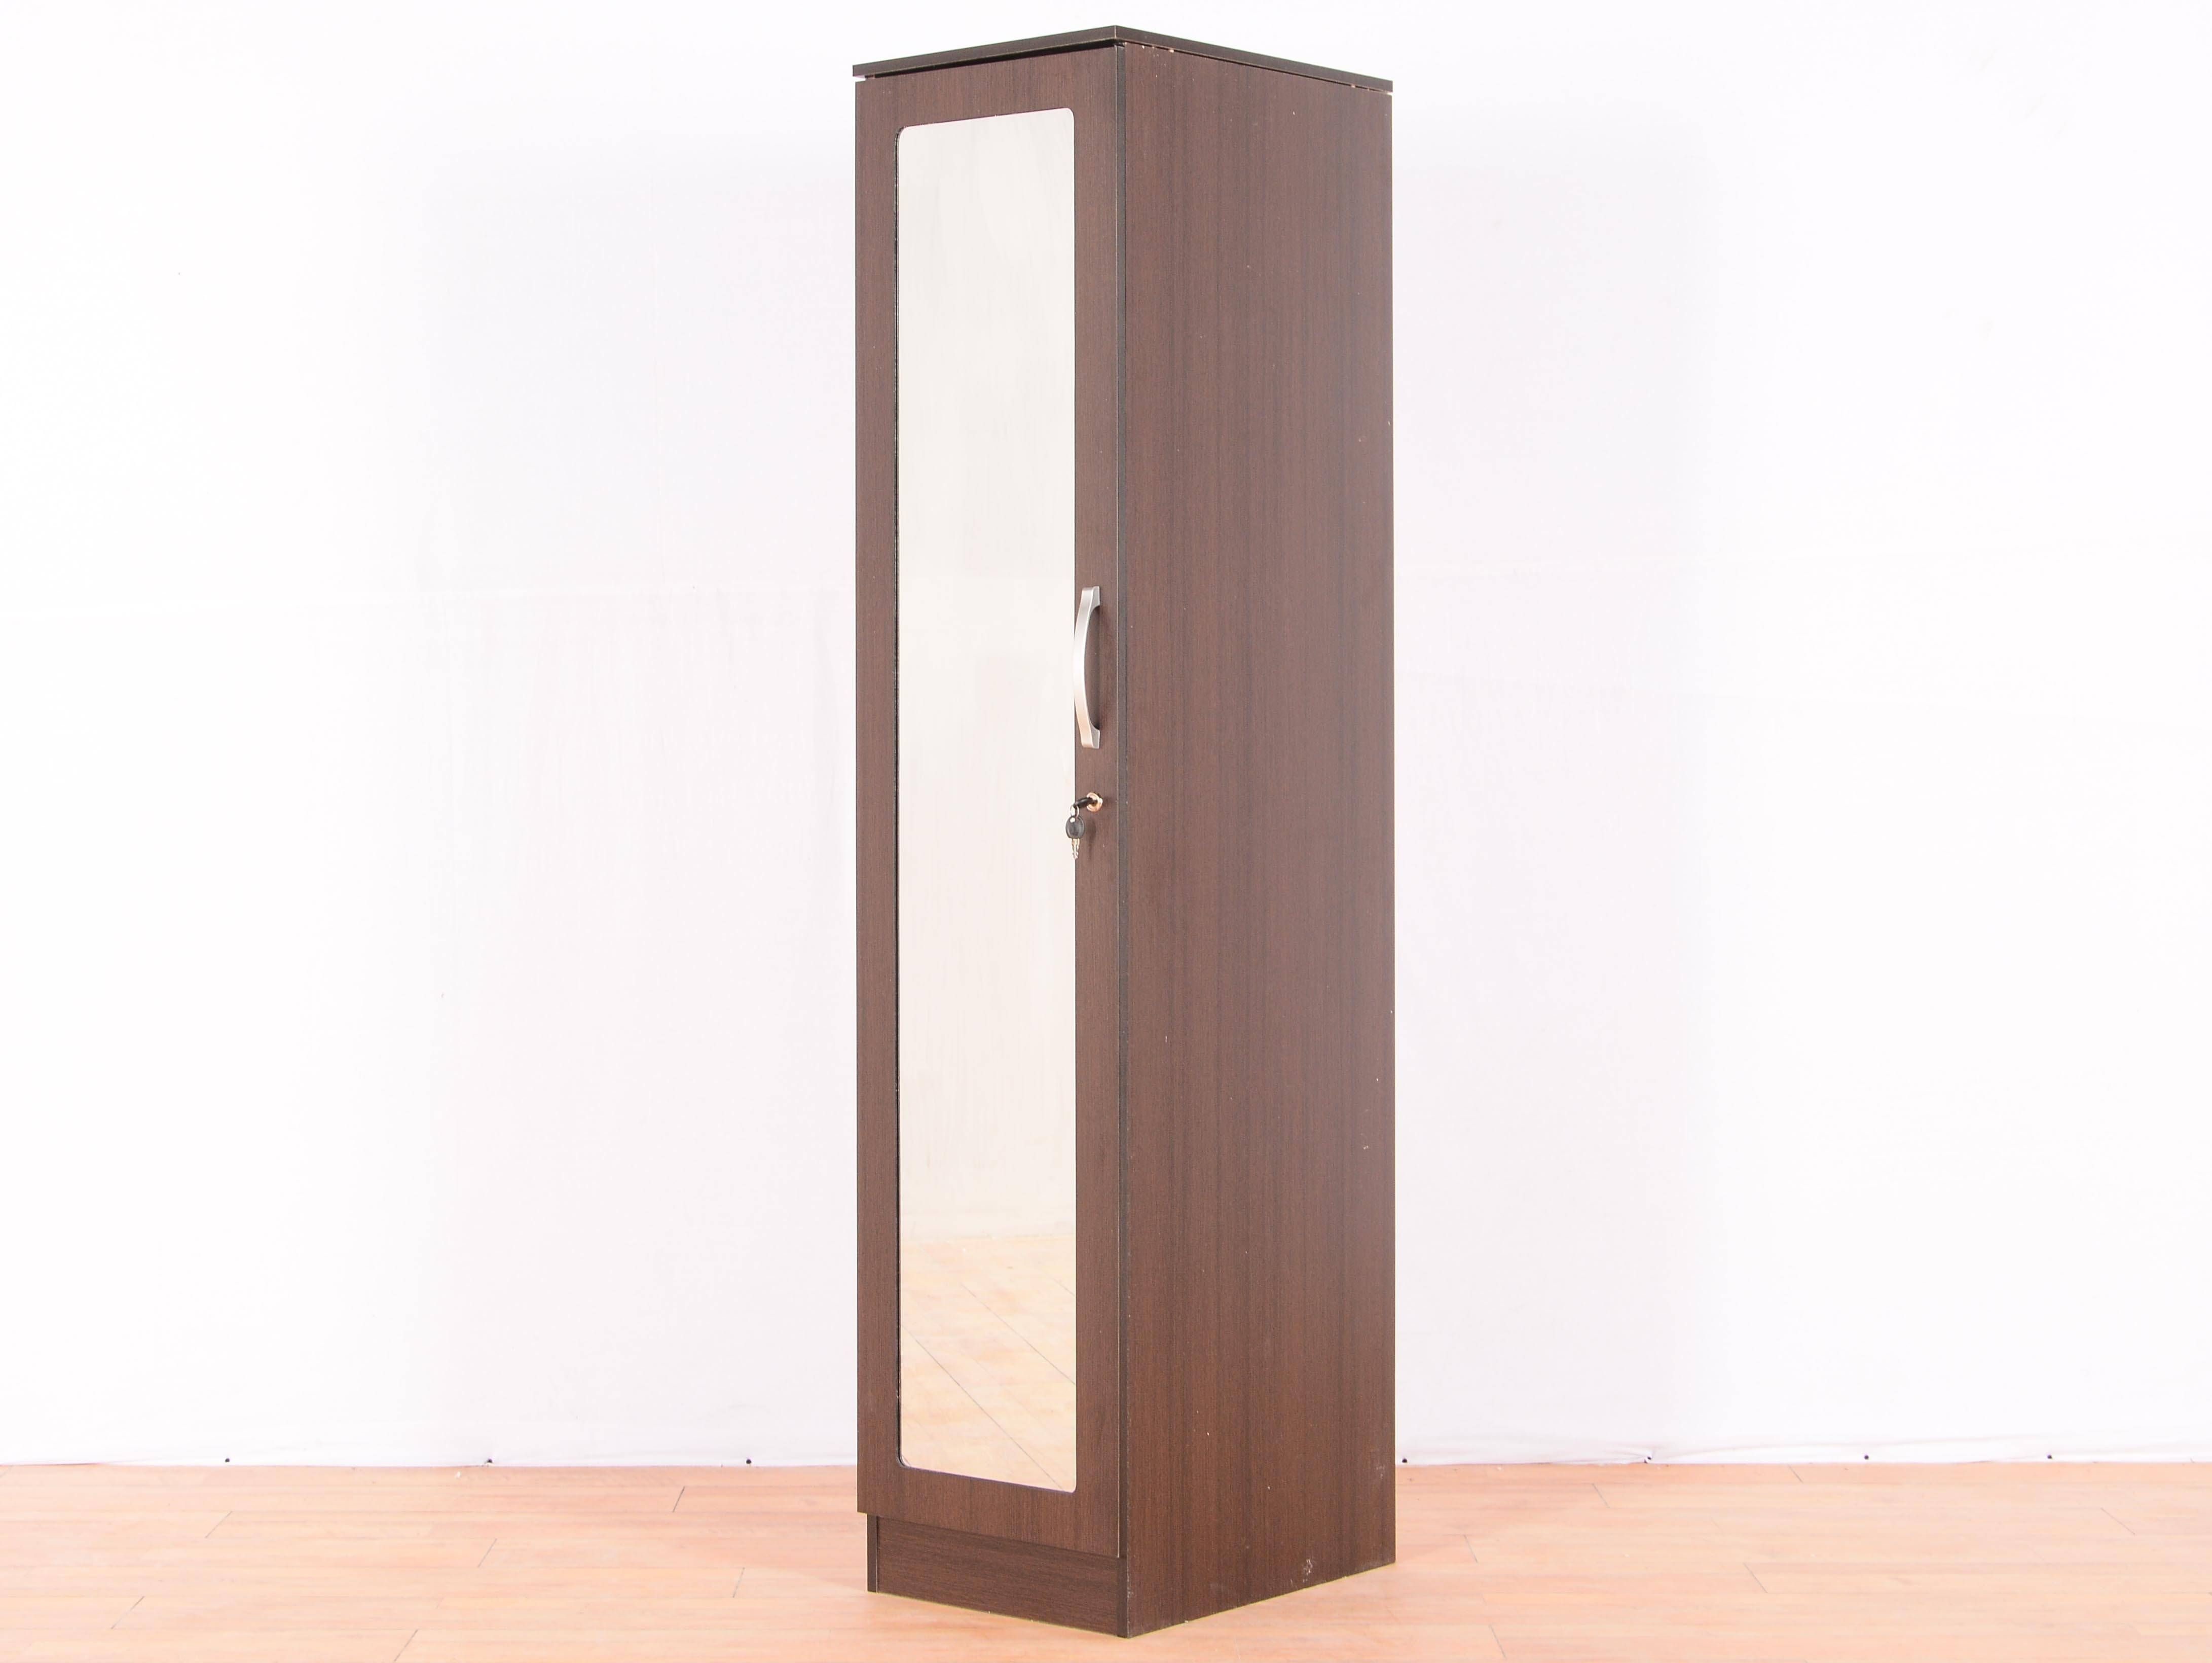 Rikotu Single Door Wardrobe With Mirrormintwud: Buy And Sell Pertaining To Single Wardrobes With Mirror (View 9 of 15)